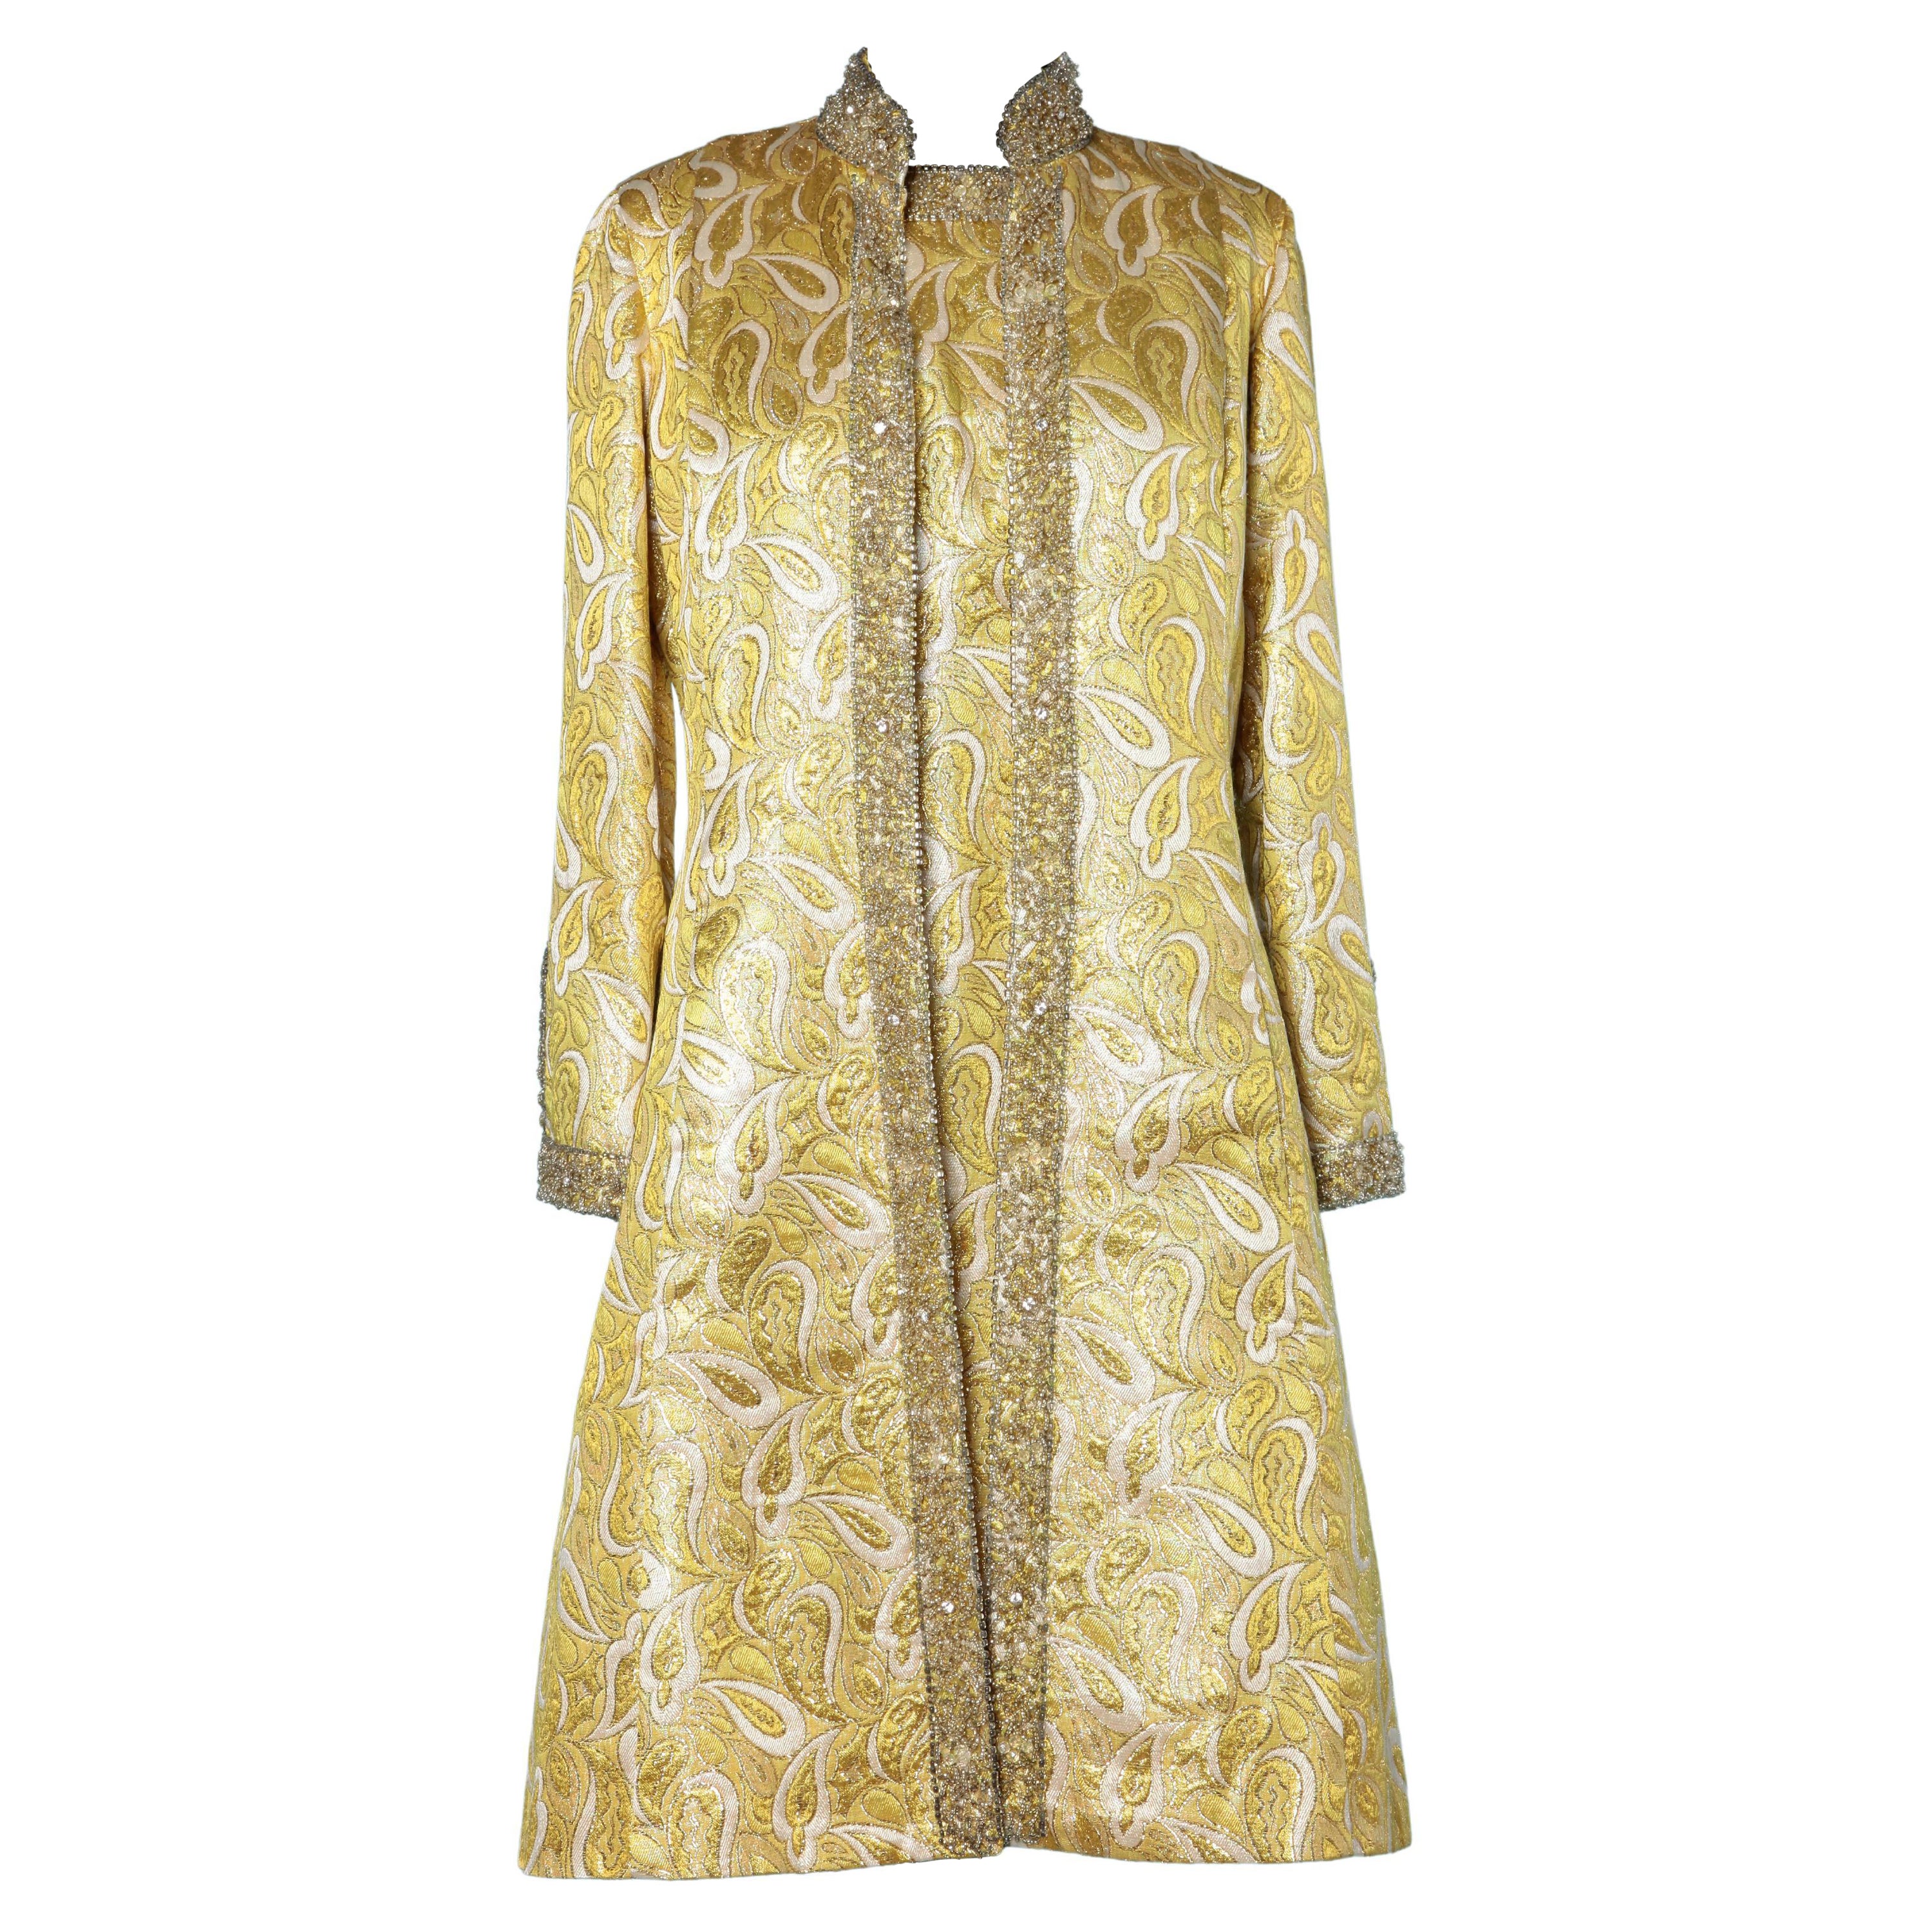 Ensemble ( coat and dress) in yellow brocade and embroideries 1960